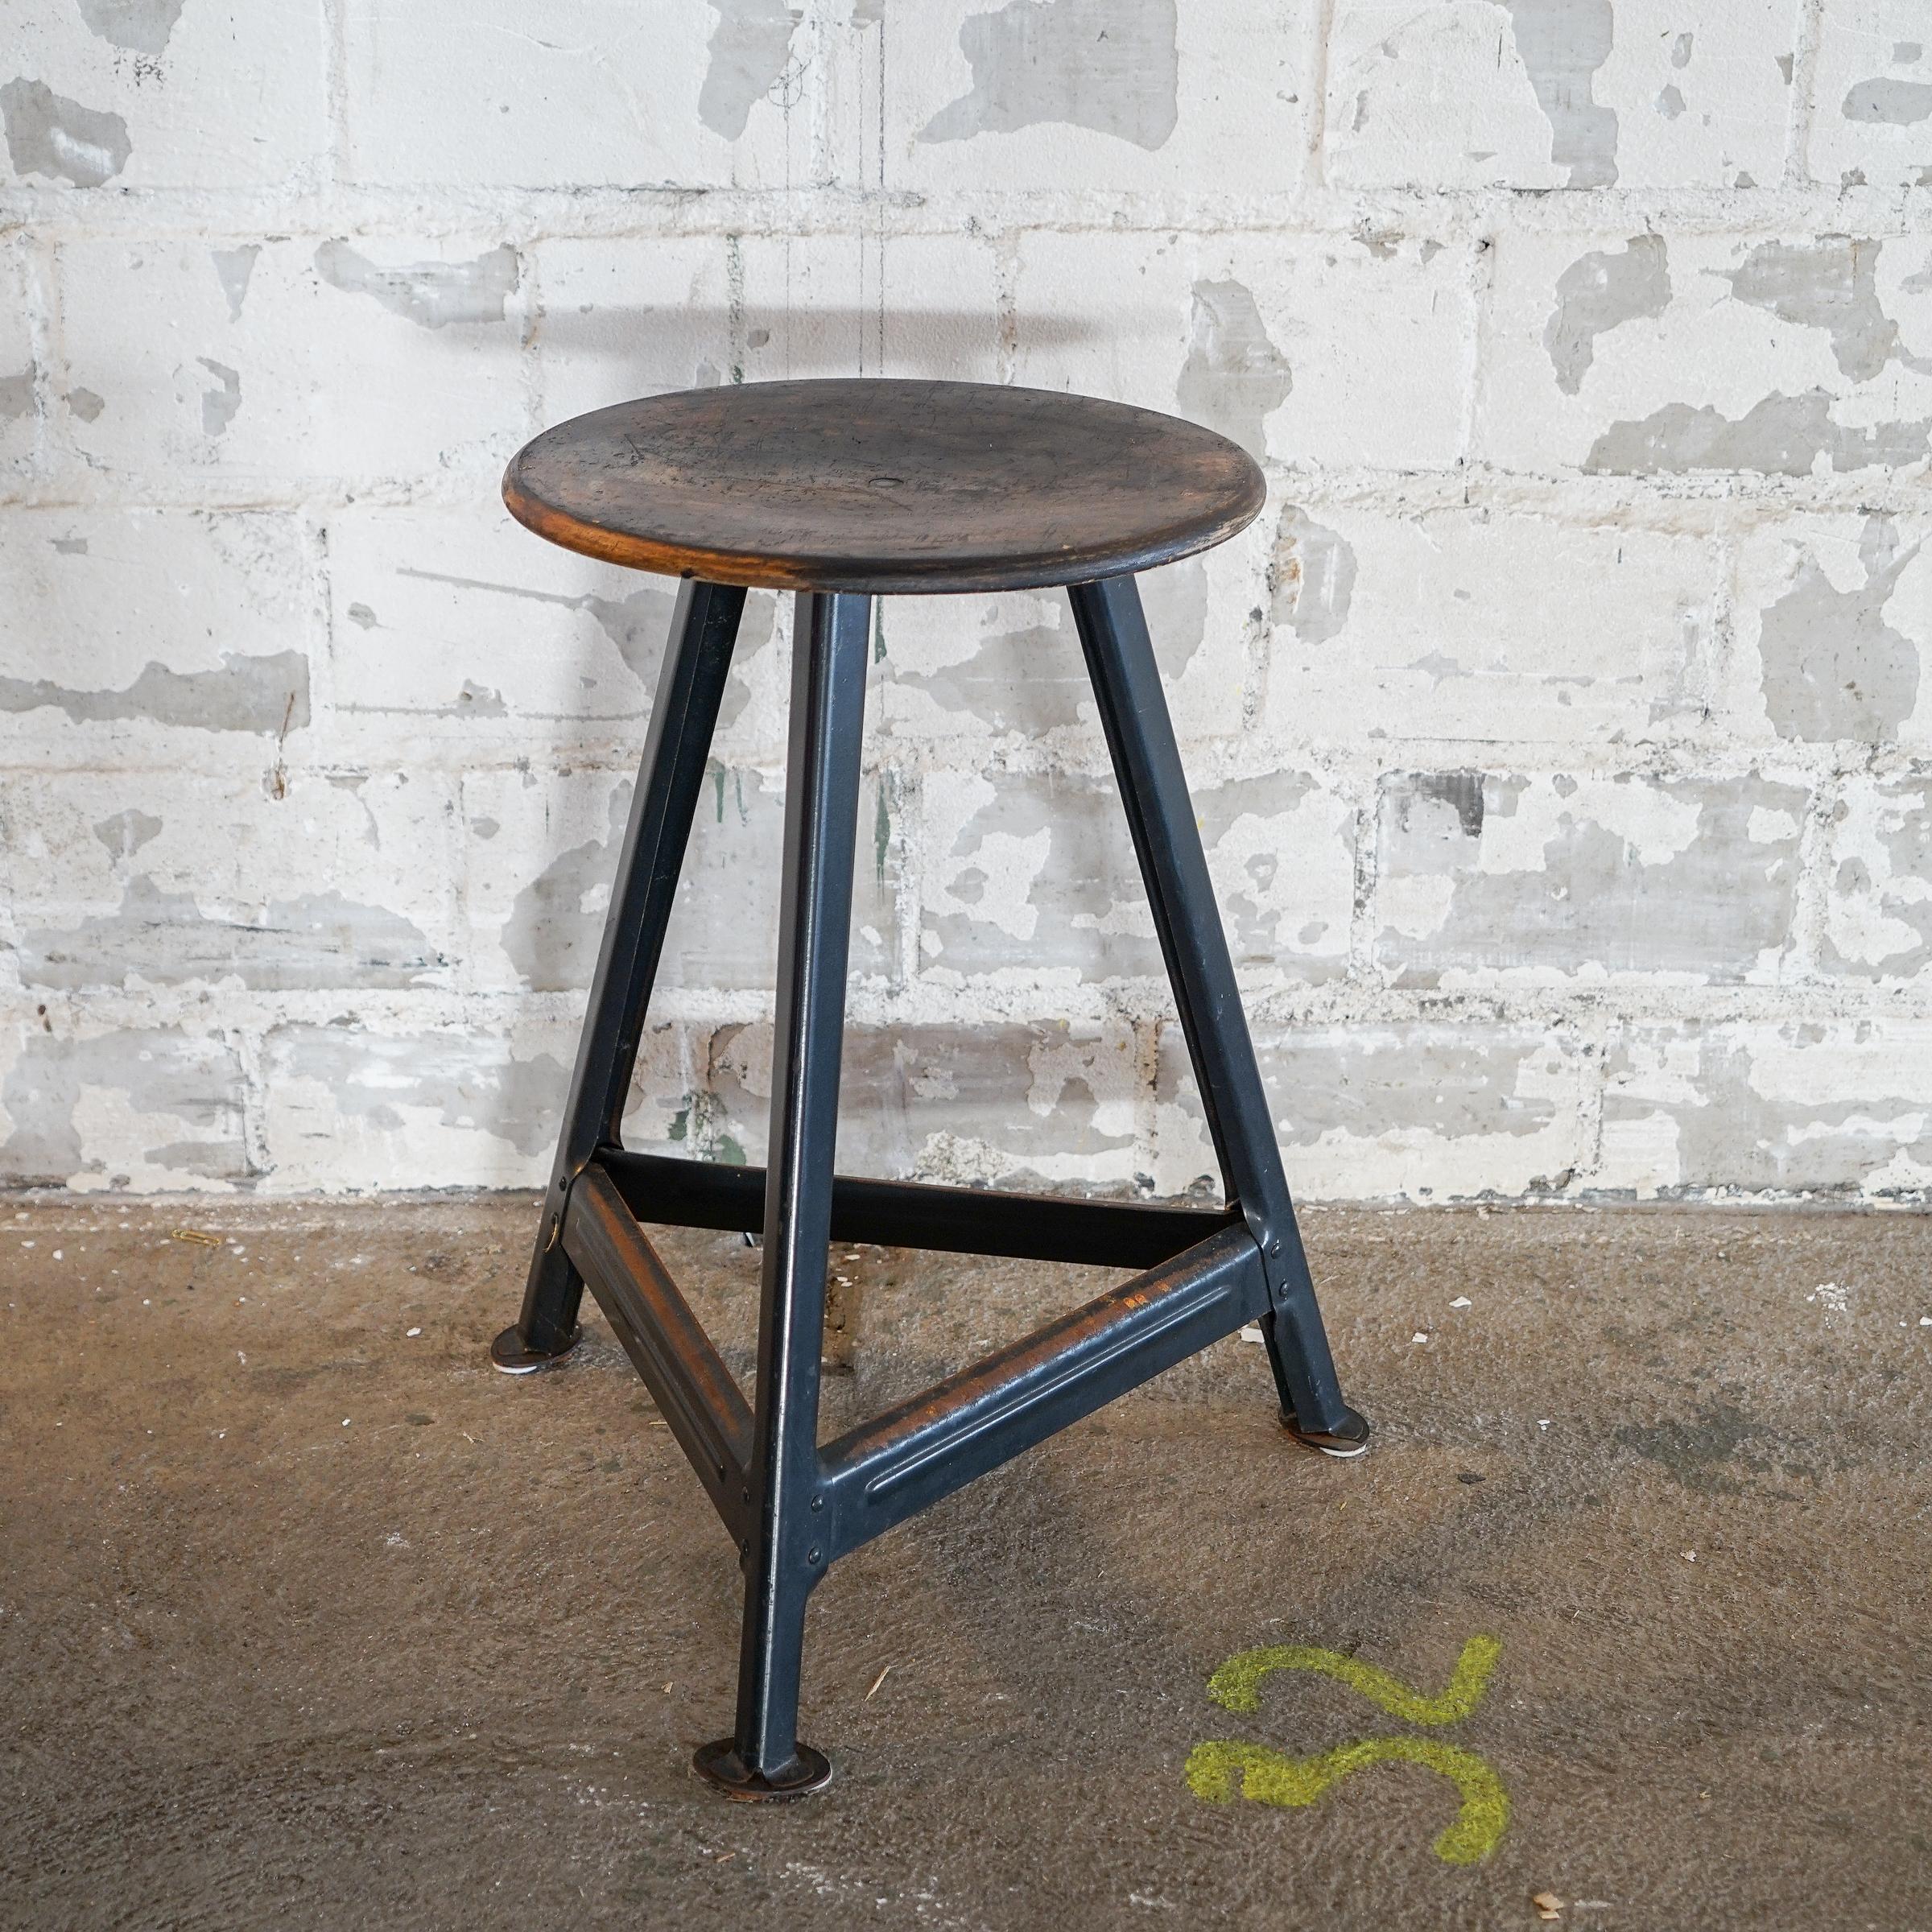 The industrial work stool par excellence: The construction of this seating furniture has existed since the 1920s and is still considered one of the most used work furniture.

The design of these stools is unmistakable due to its purism, the clear